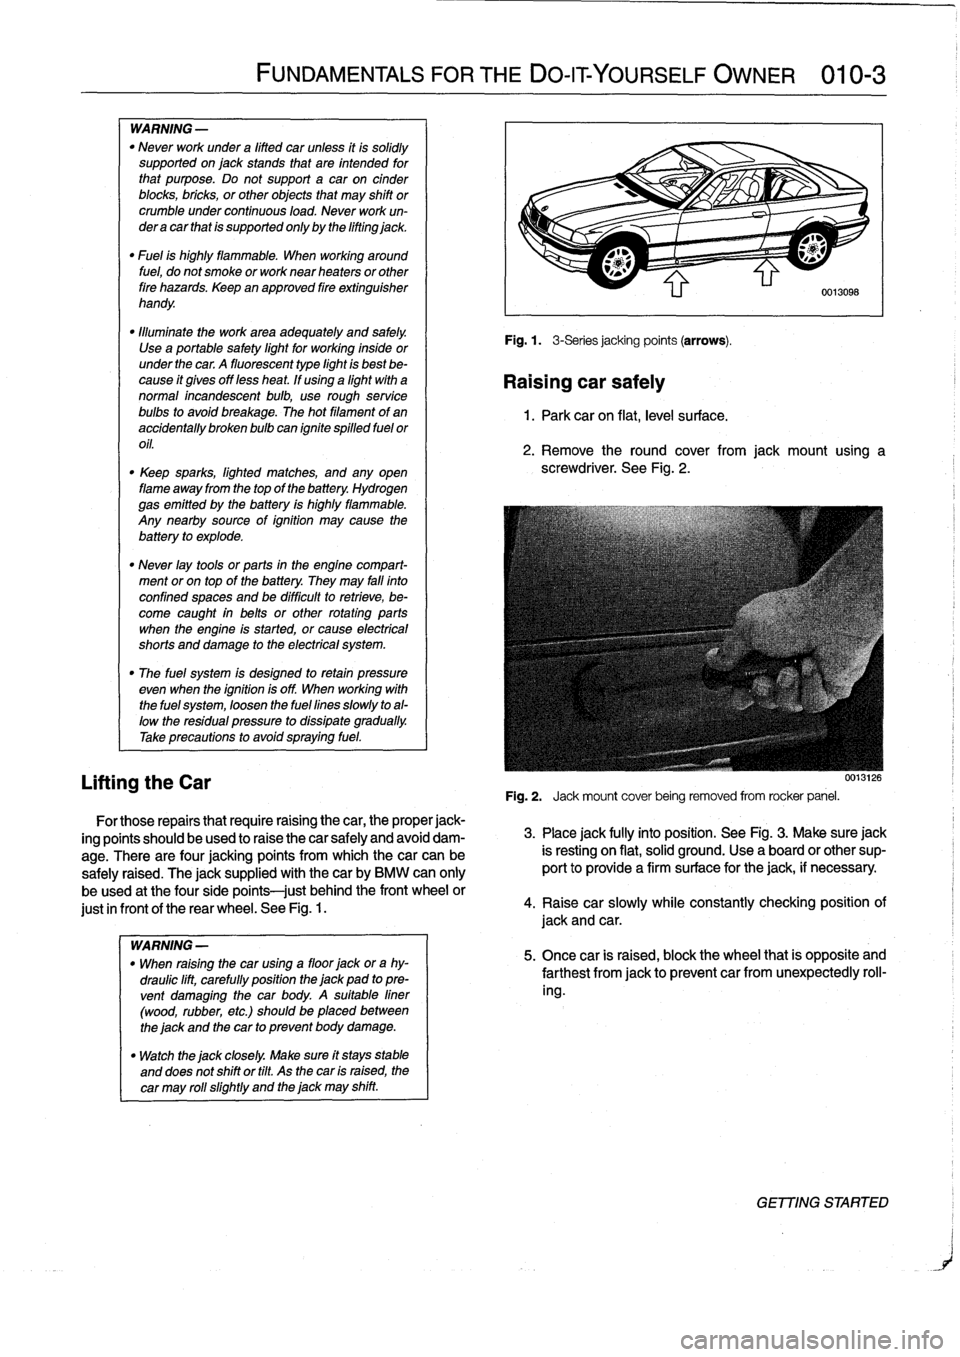 BMW 328i 1995 E36 Workshop Manual 
WARNING
-

"
Never
work
under
a
lifted
car
unless
it
is
solidly
supported
on
jack
stands
that
are
intended
for
that
purpose
.
Do
not
support
a
car
on
cinder
blocks,
bricks,
or
other
objects
that
may
